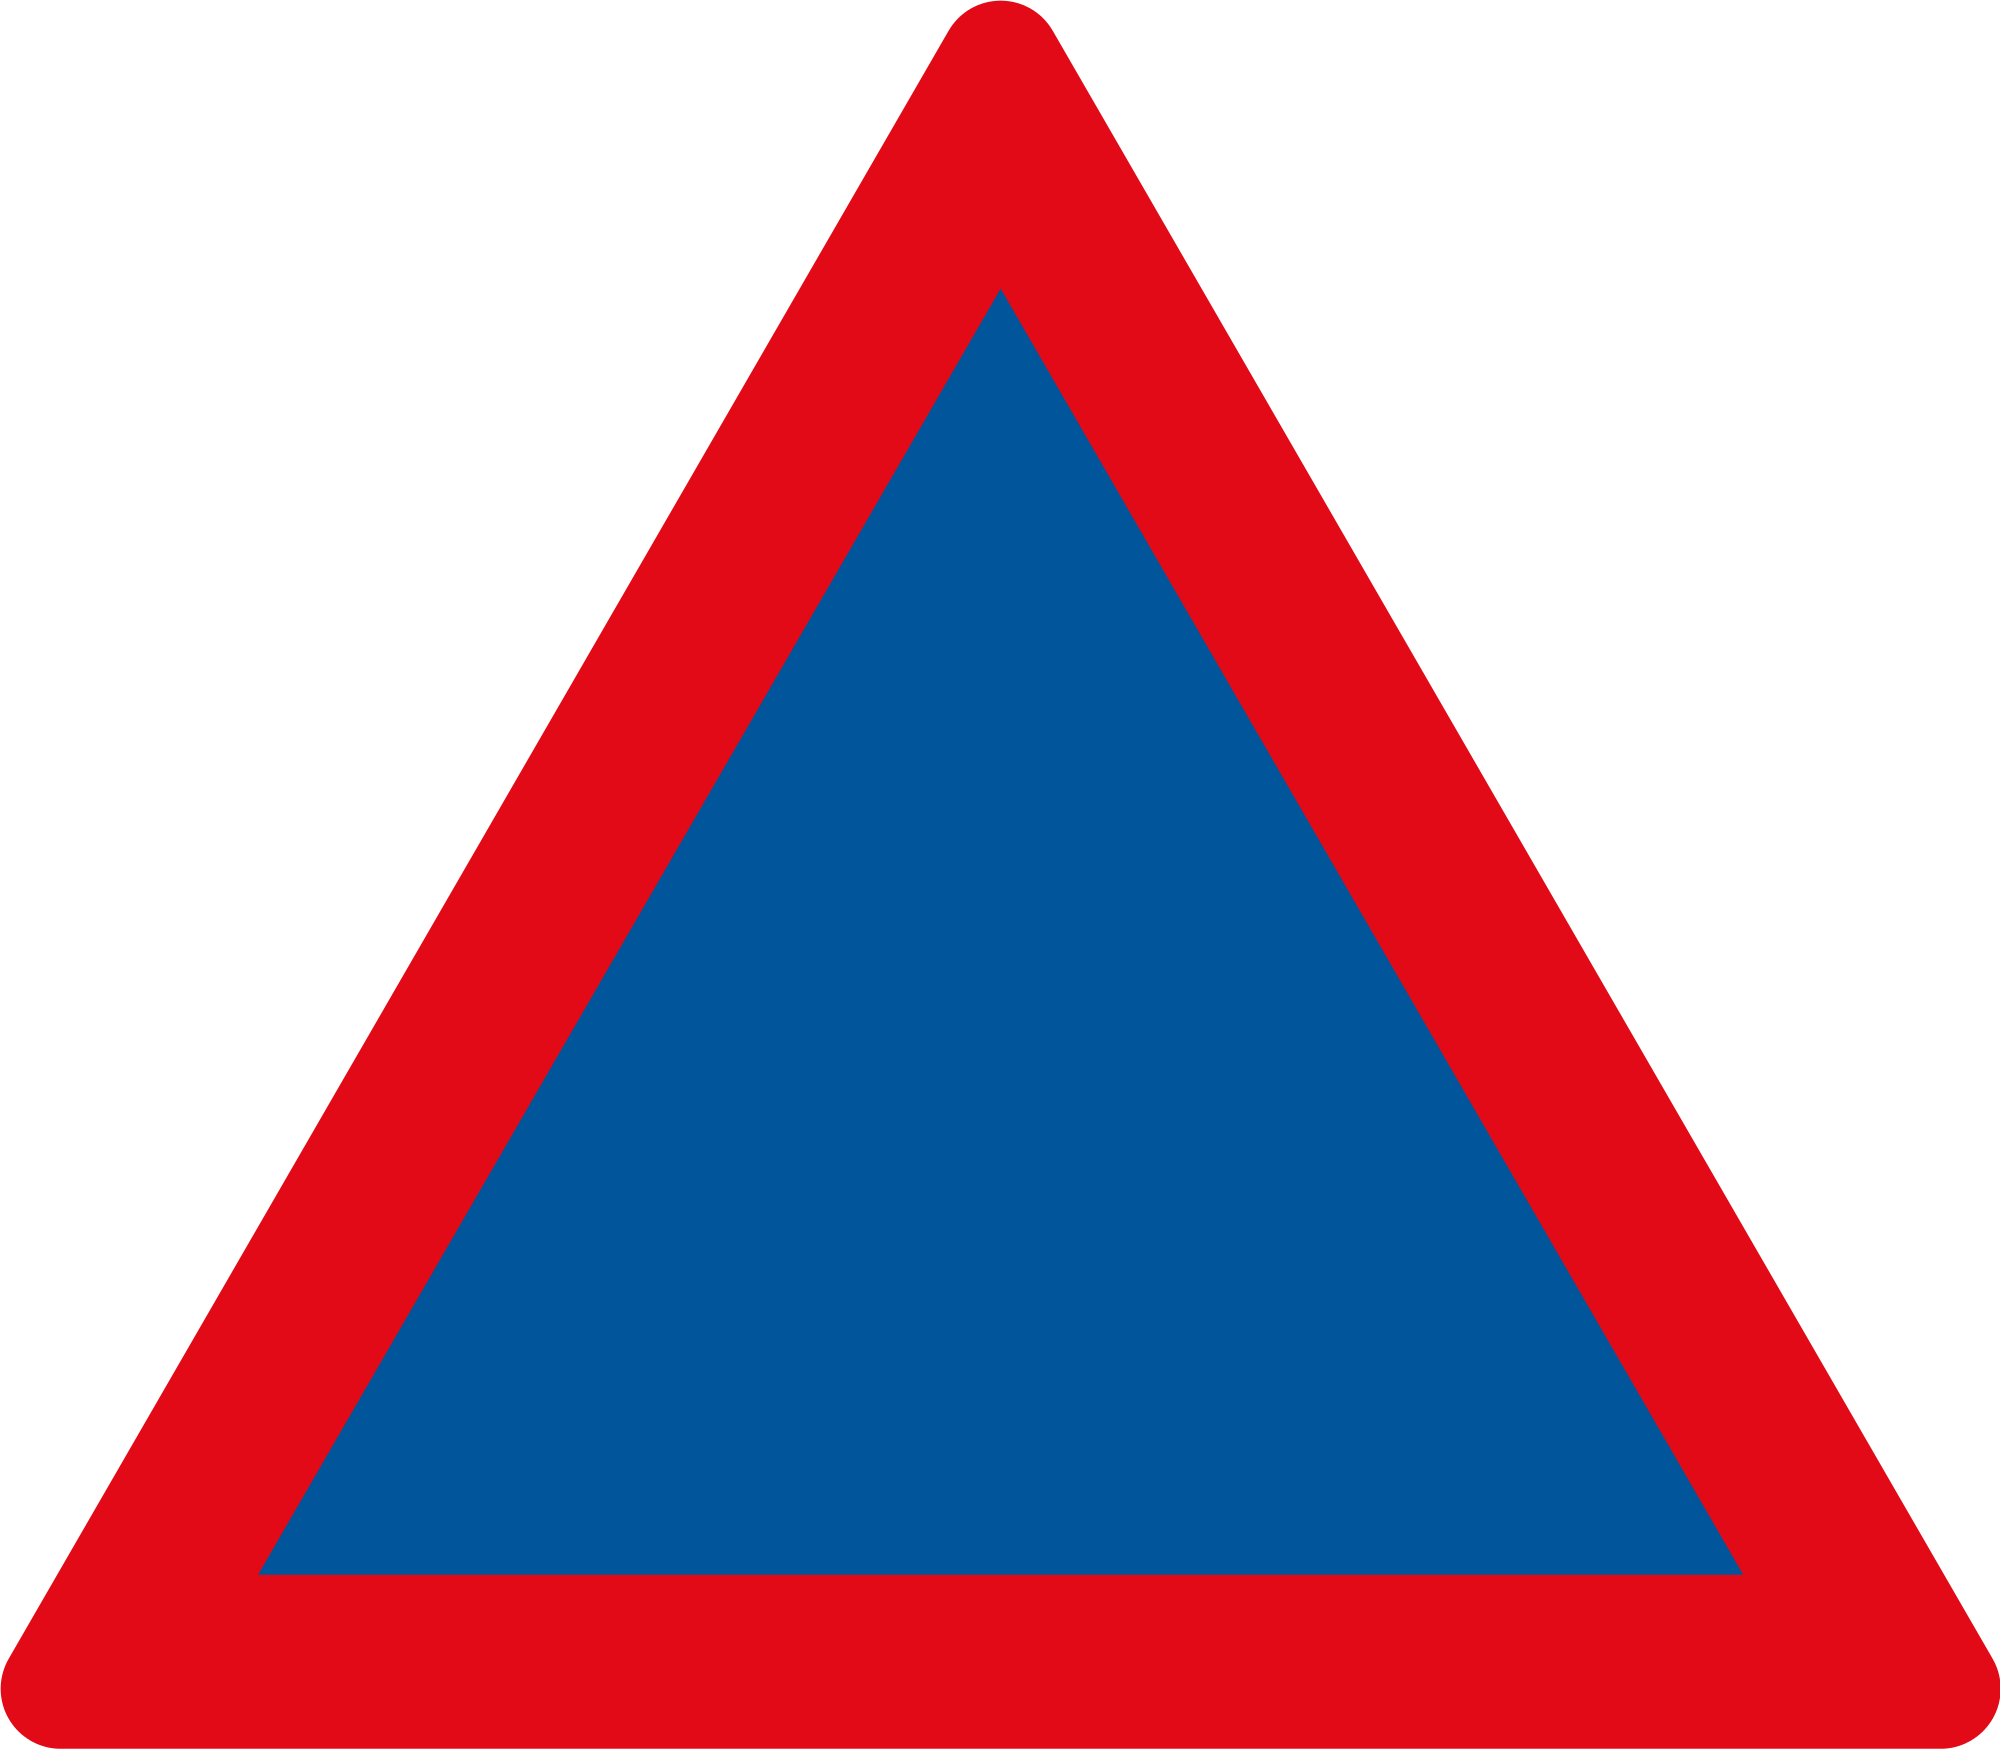 File:Triangle warning sign (red and blue).svg